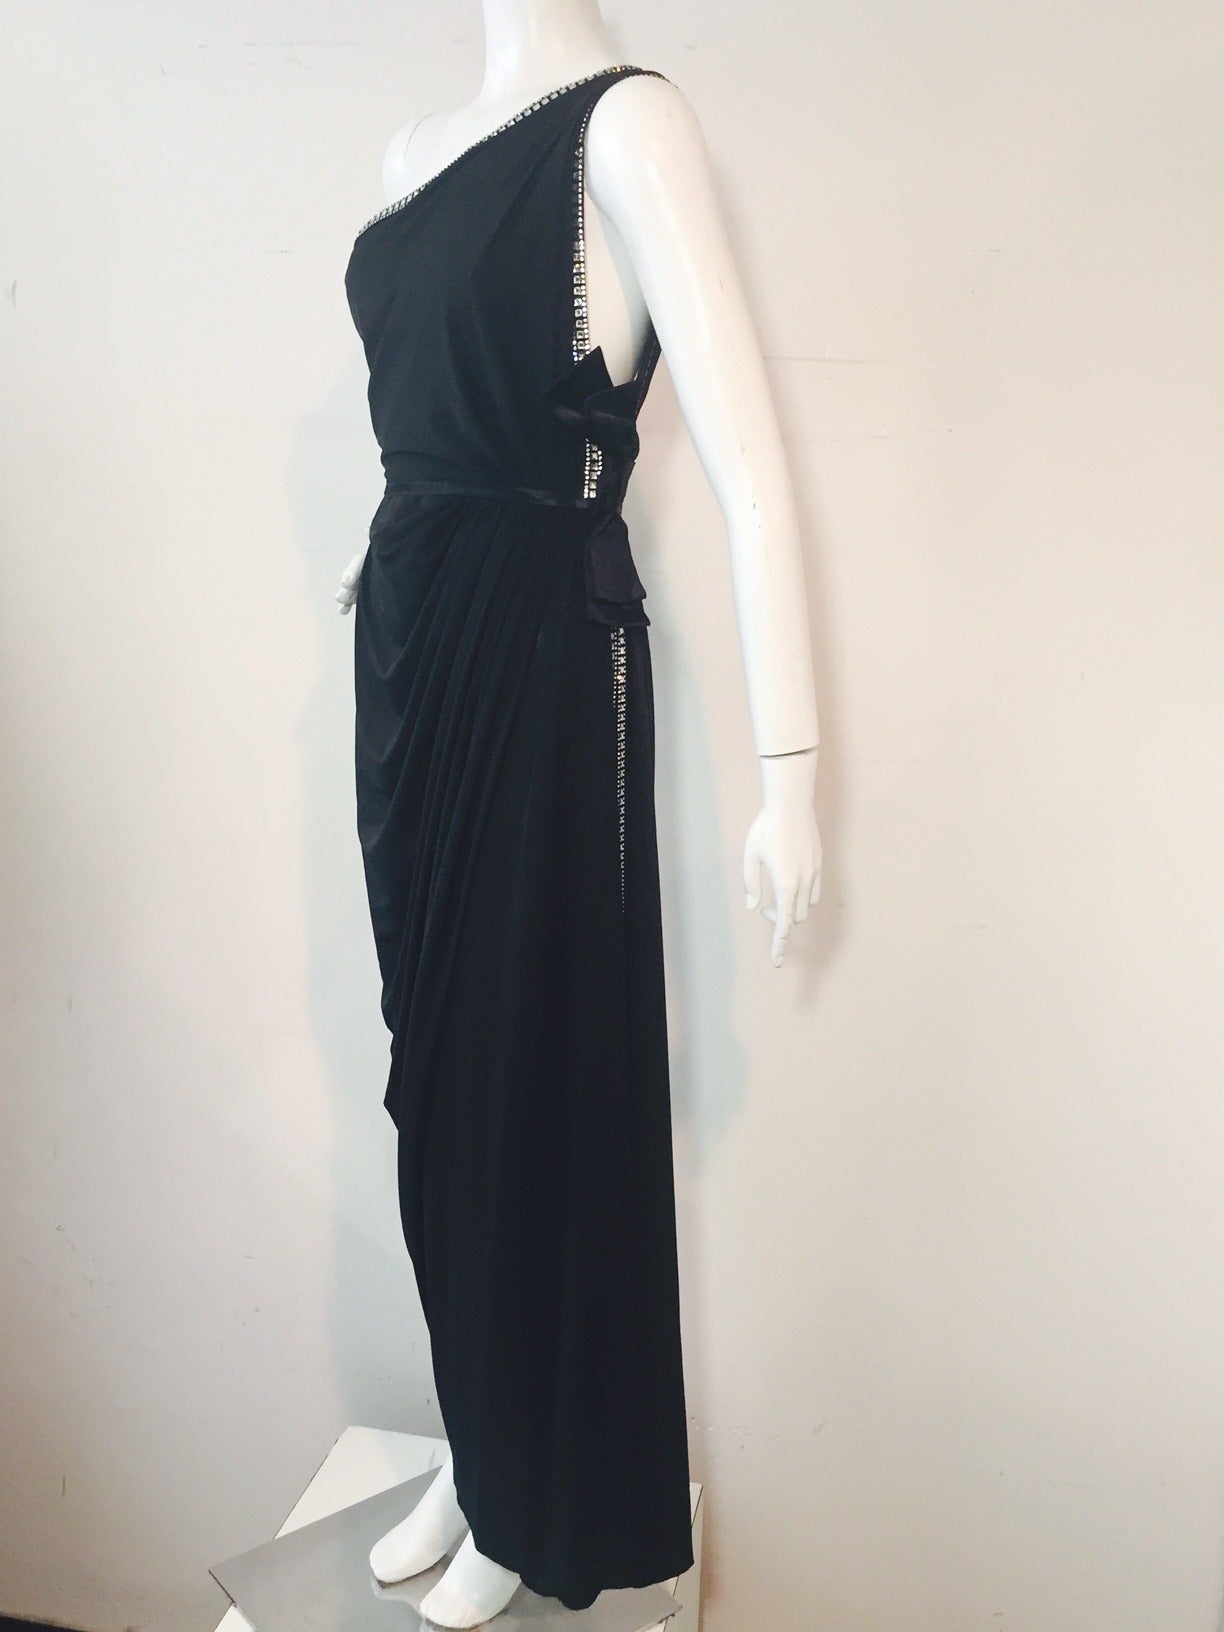 A stunning and revealing 1990s Hall Ludlow Haute Couture evening gown in black polyesther:  One-shouldered styling with scandalously high side slit.  Neckline and side slit are accentuated by a gorgeous heavy line of rhinestones.  Low back